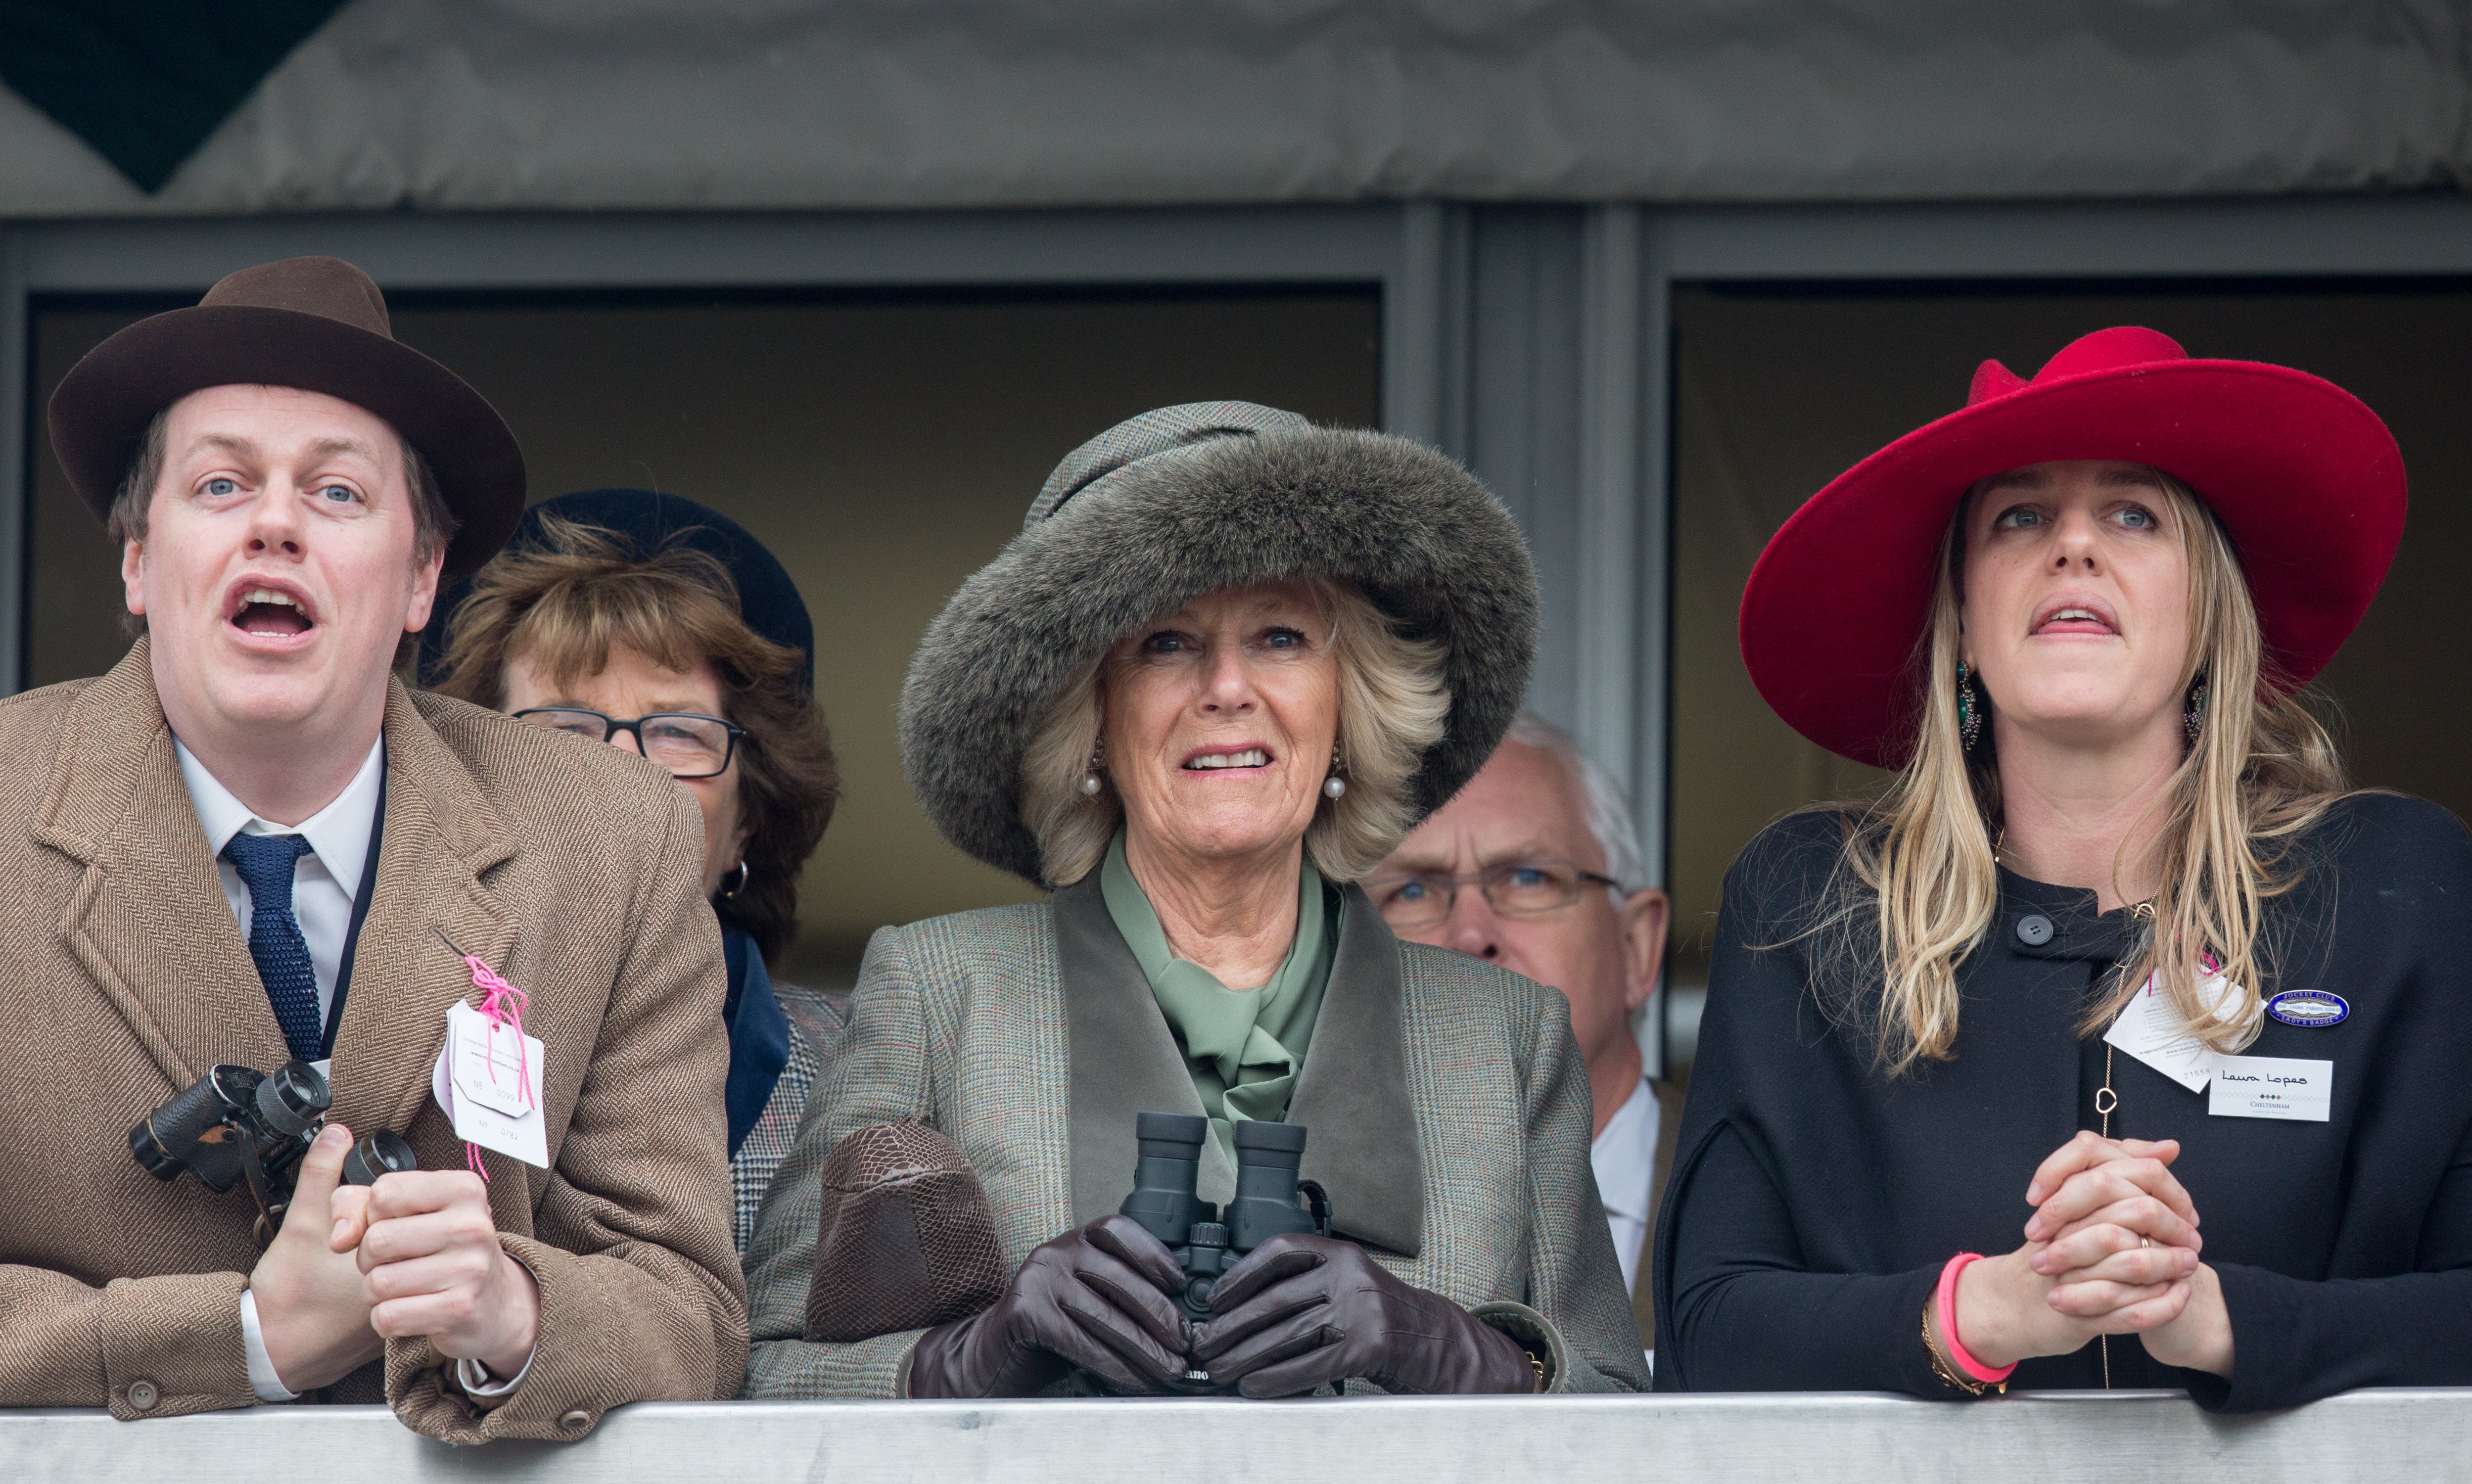 Camilla, Duchess of Cornwall (C) watches a race from the temporary Royal Box with her son Tom Parker Bowles and daughter Laura Lopes